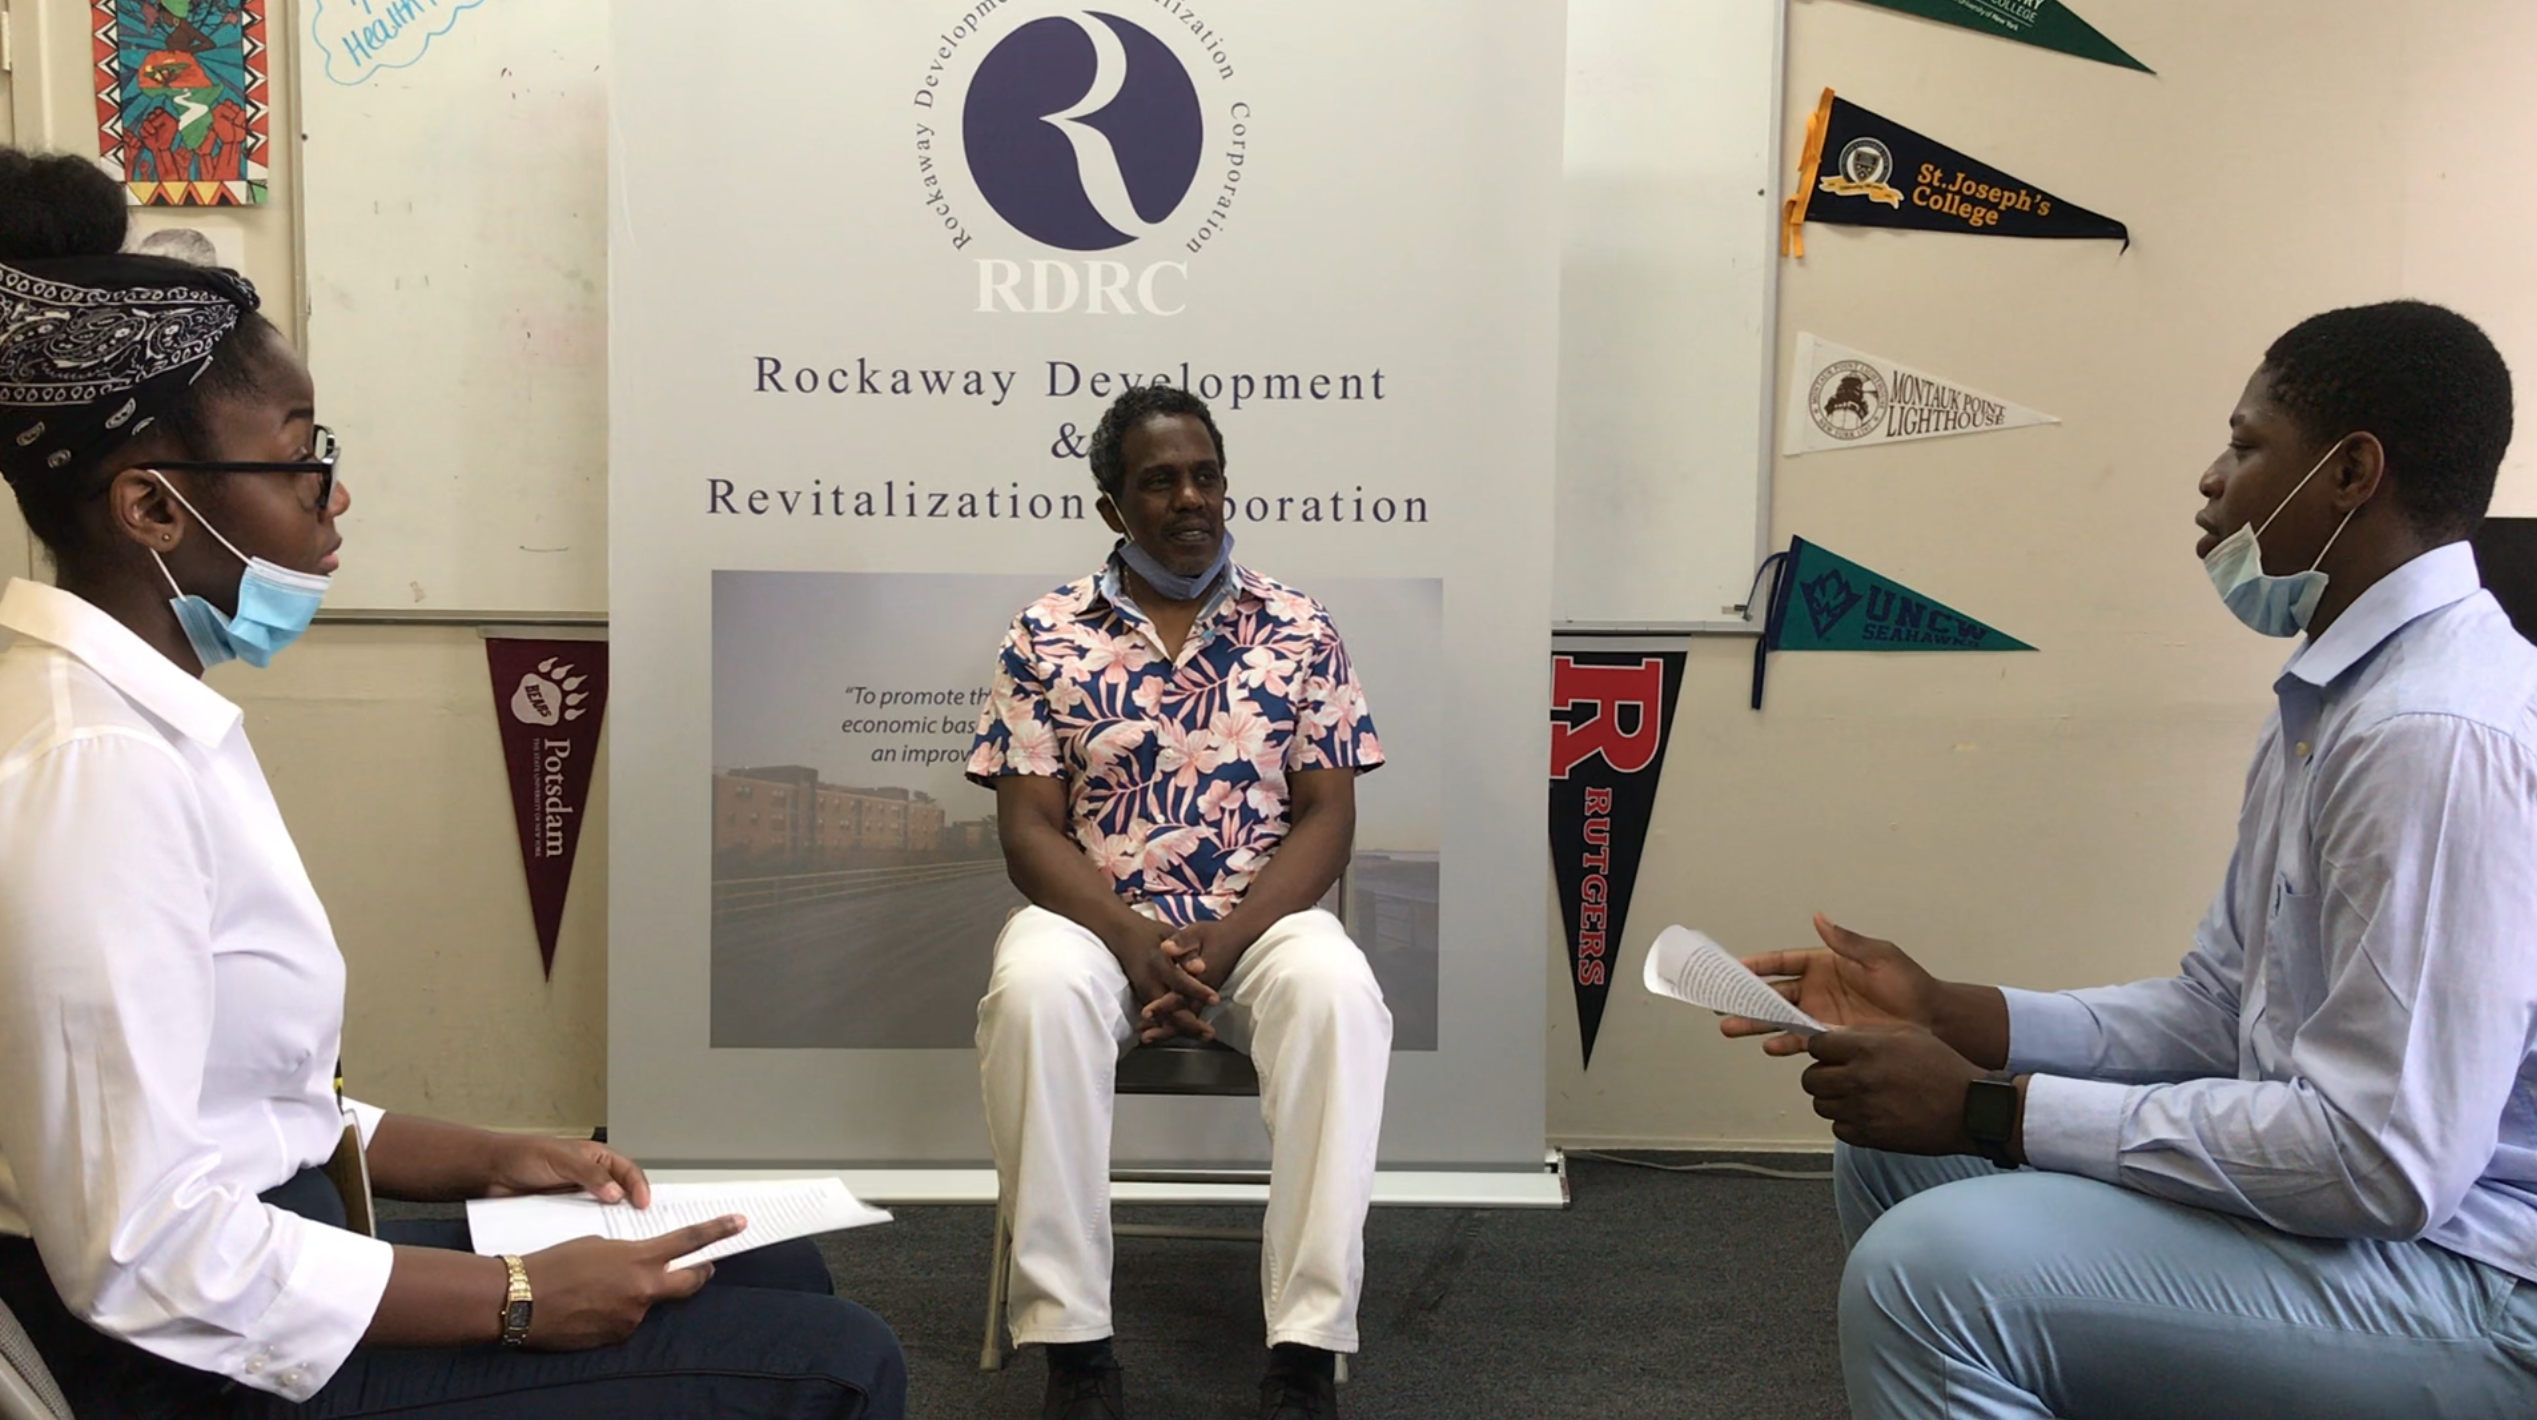 Three Black adults sit in chairs forming a circle in what appears to be a classroom. They are dressed in business causal wear and have surgical masks on but tucked under their chins for a conversation. Behind them is a large poster with the logo for the Rockaway Development & Revitalization Cooperation.